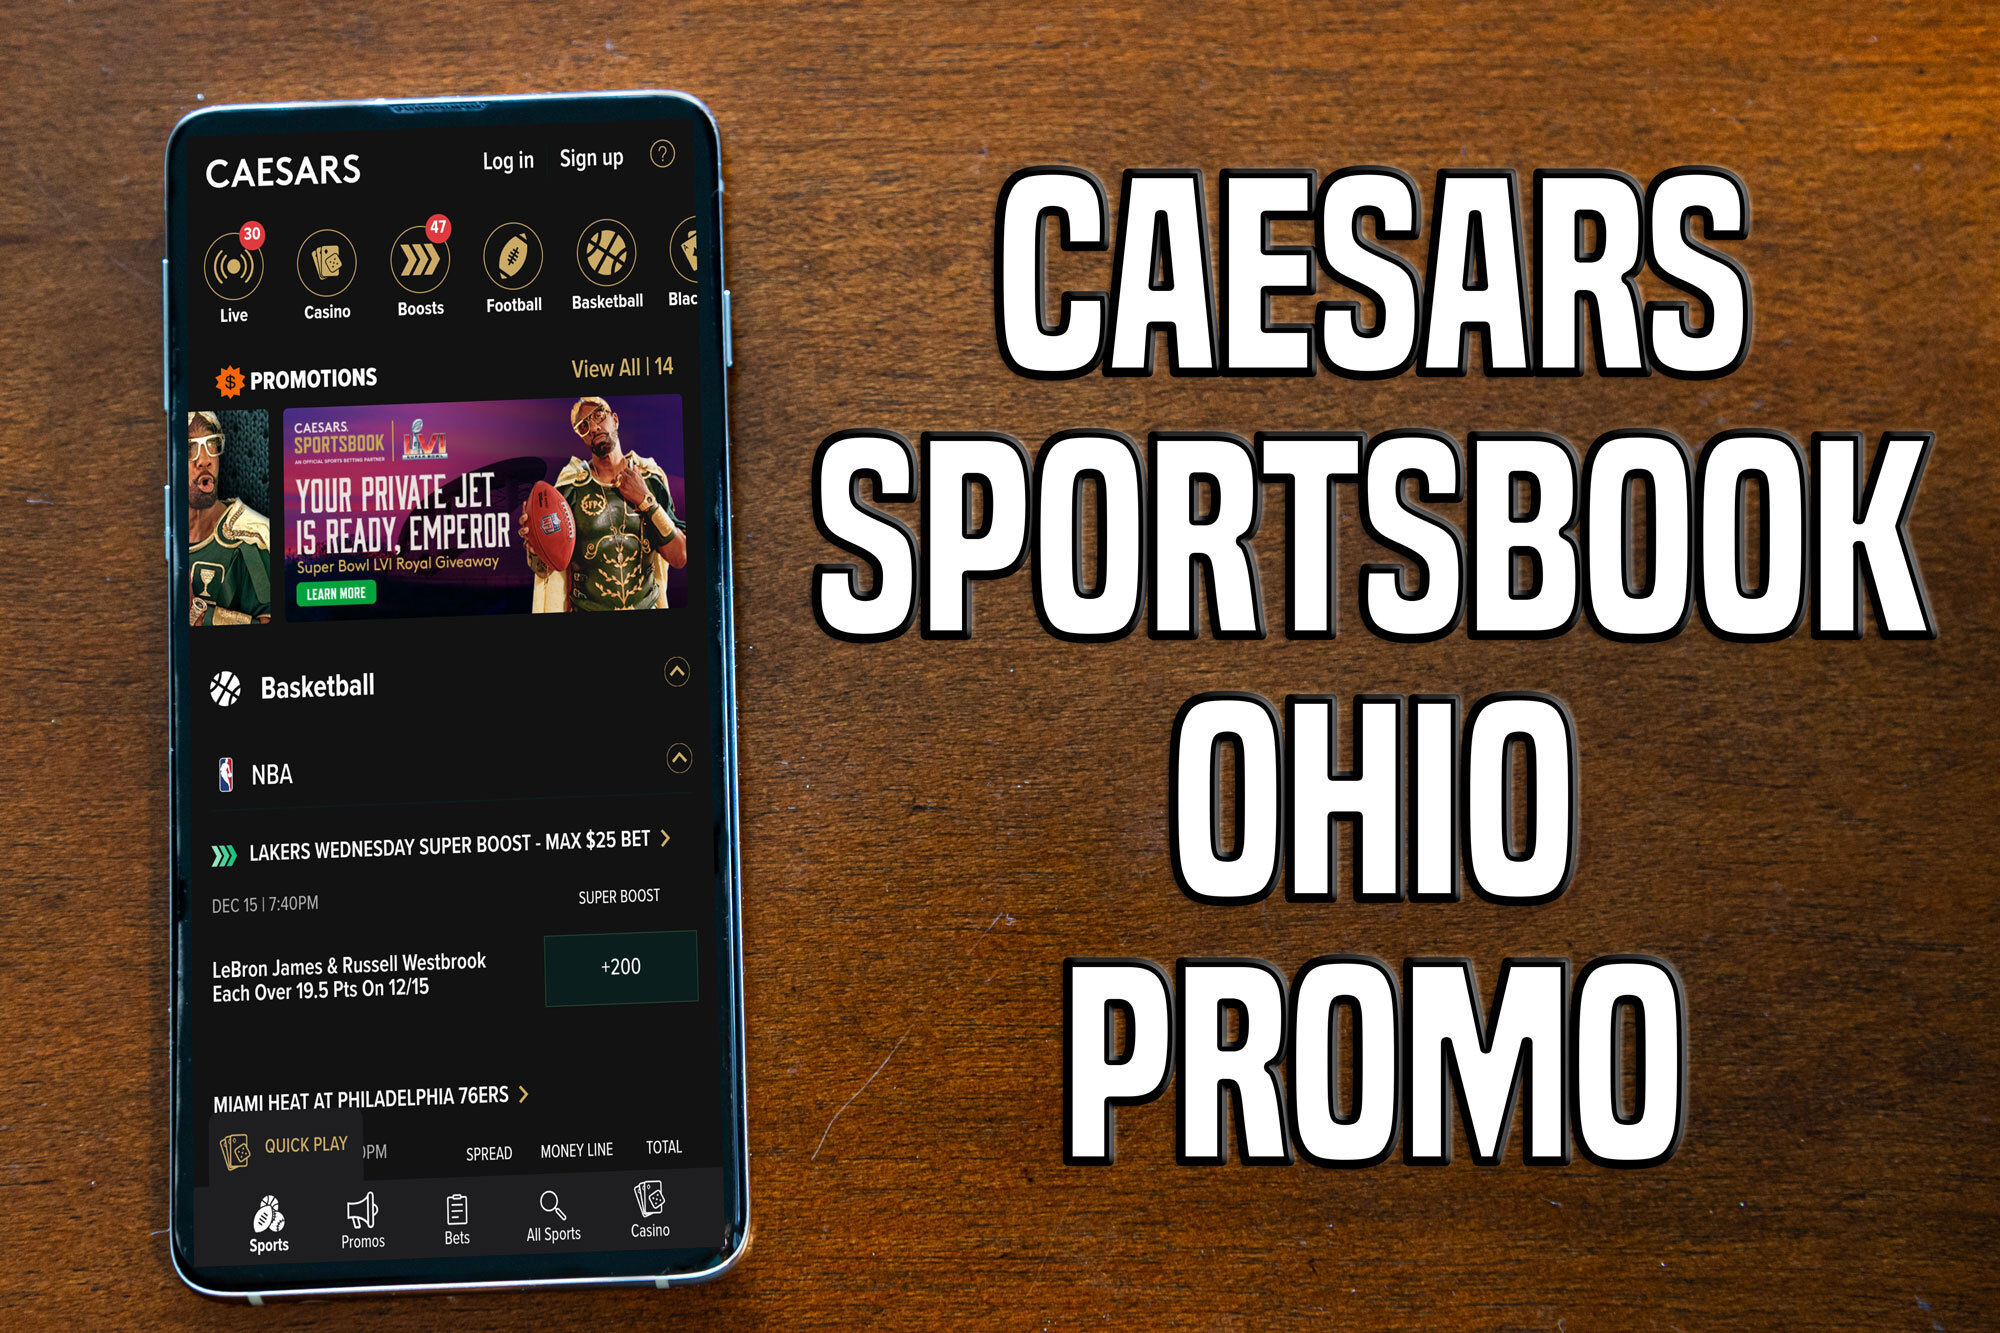 Caesars Sportsbook Ohio promo brings new users outstanding Super Bowl offer  